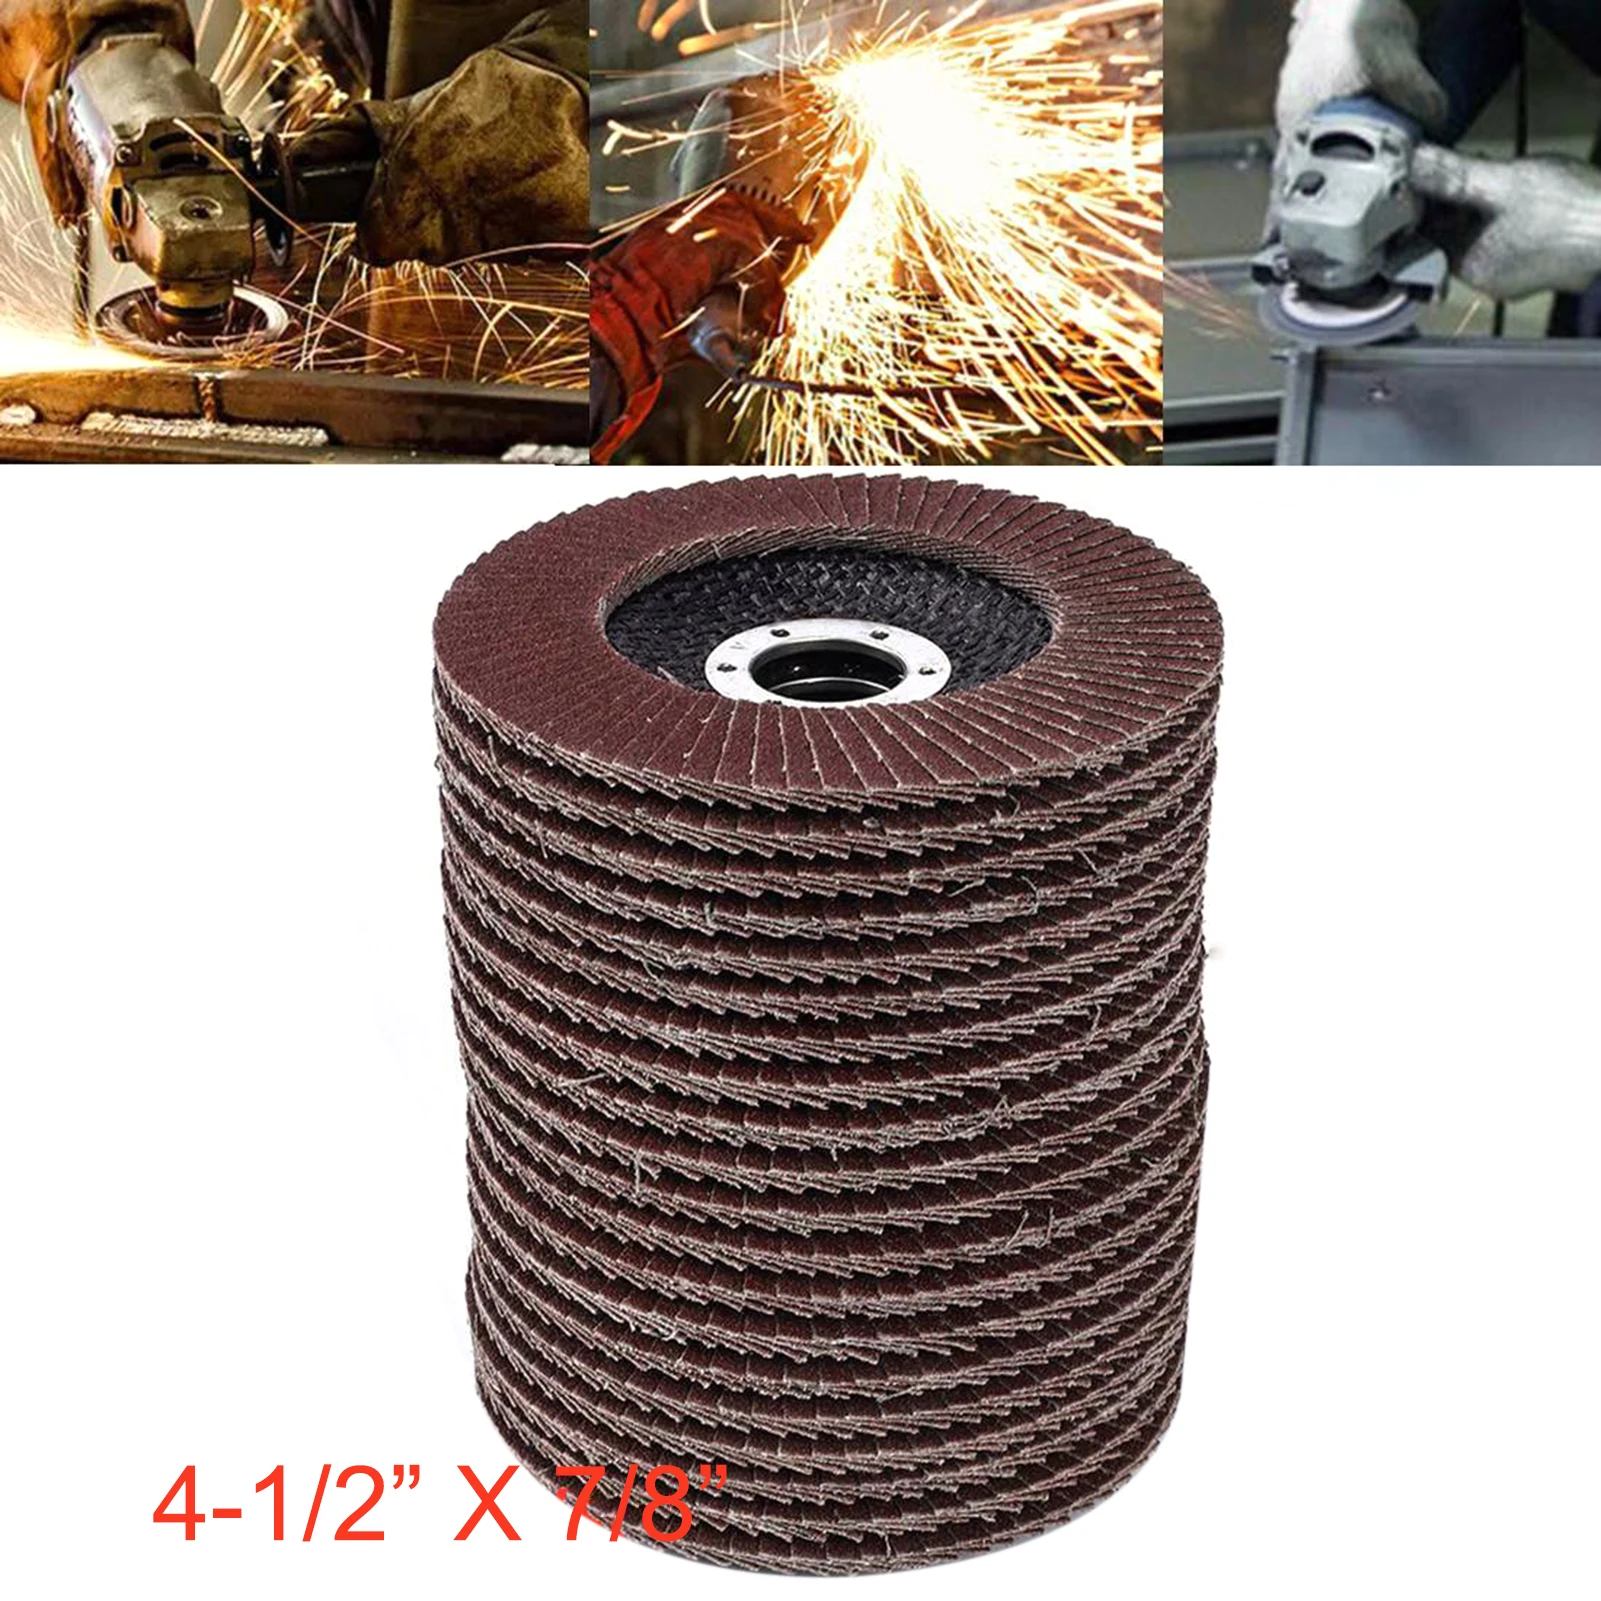 

20Pcs Assorted Sanding Grinding Wheel Aluminum Oxide Abrasives Flap Discs Compatible with 4.5'' Angle Grinder